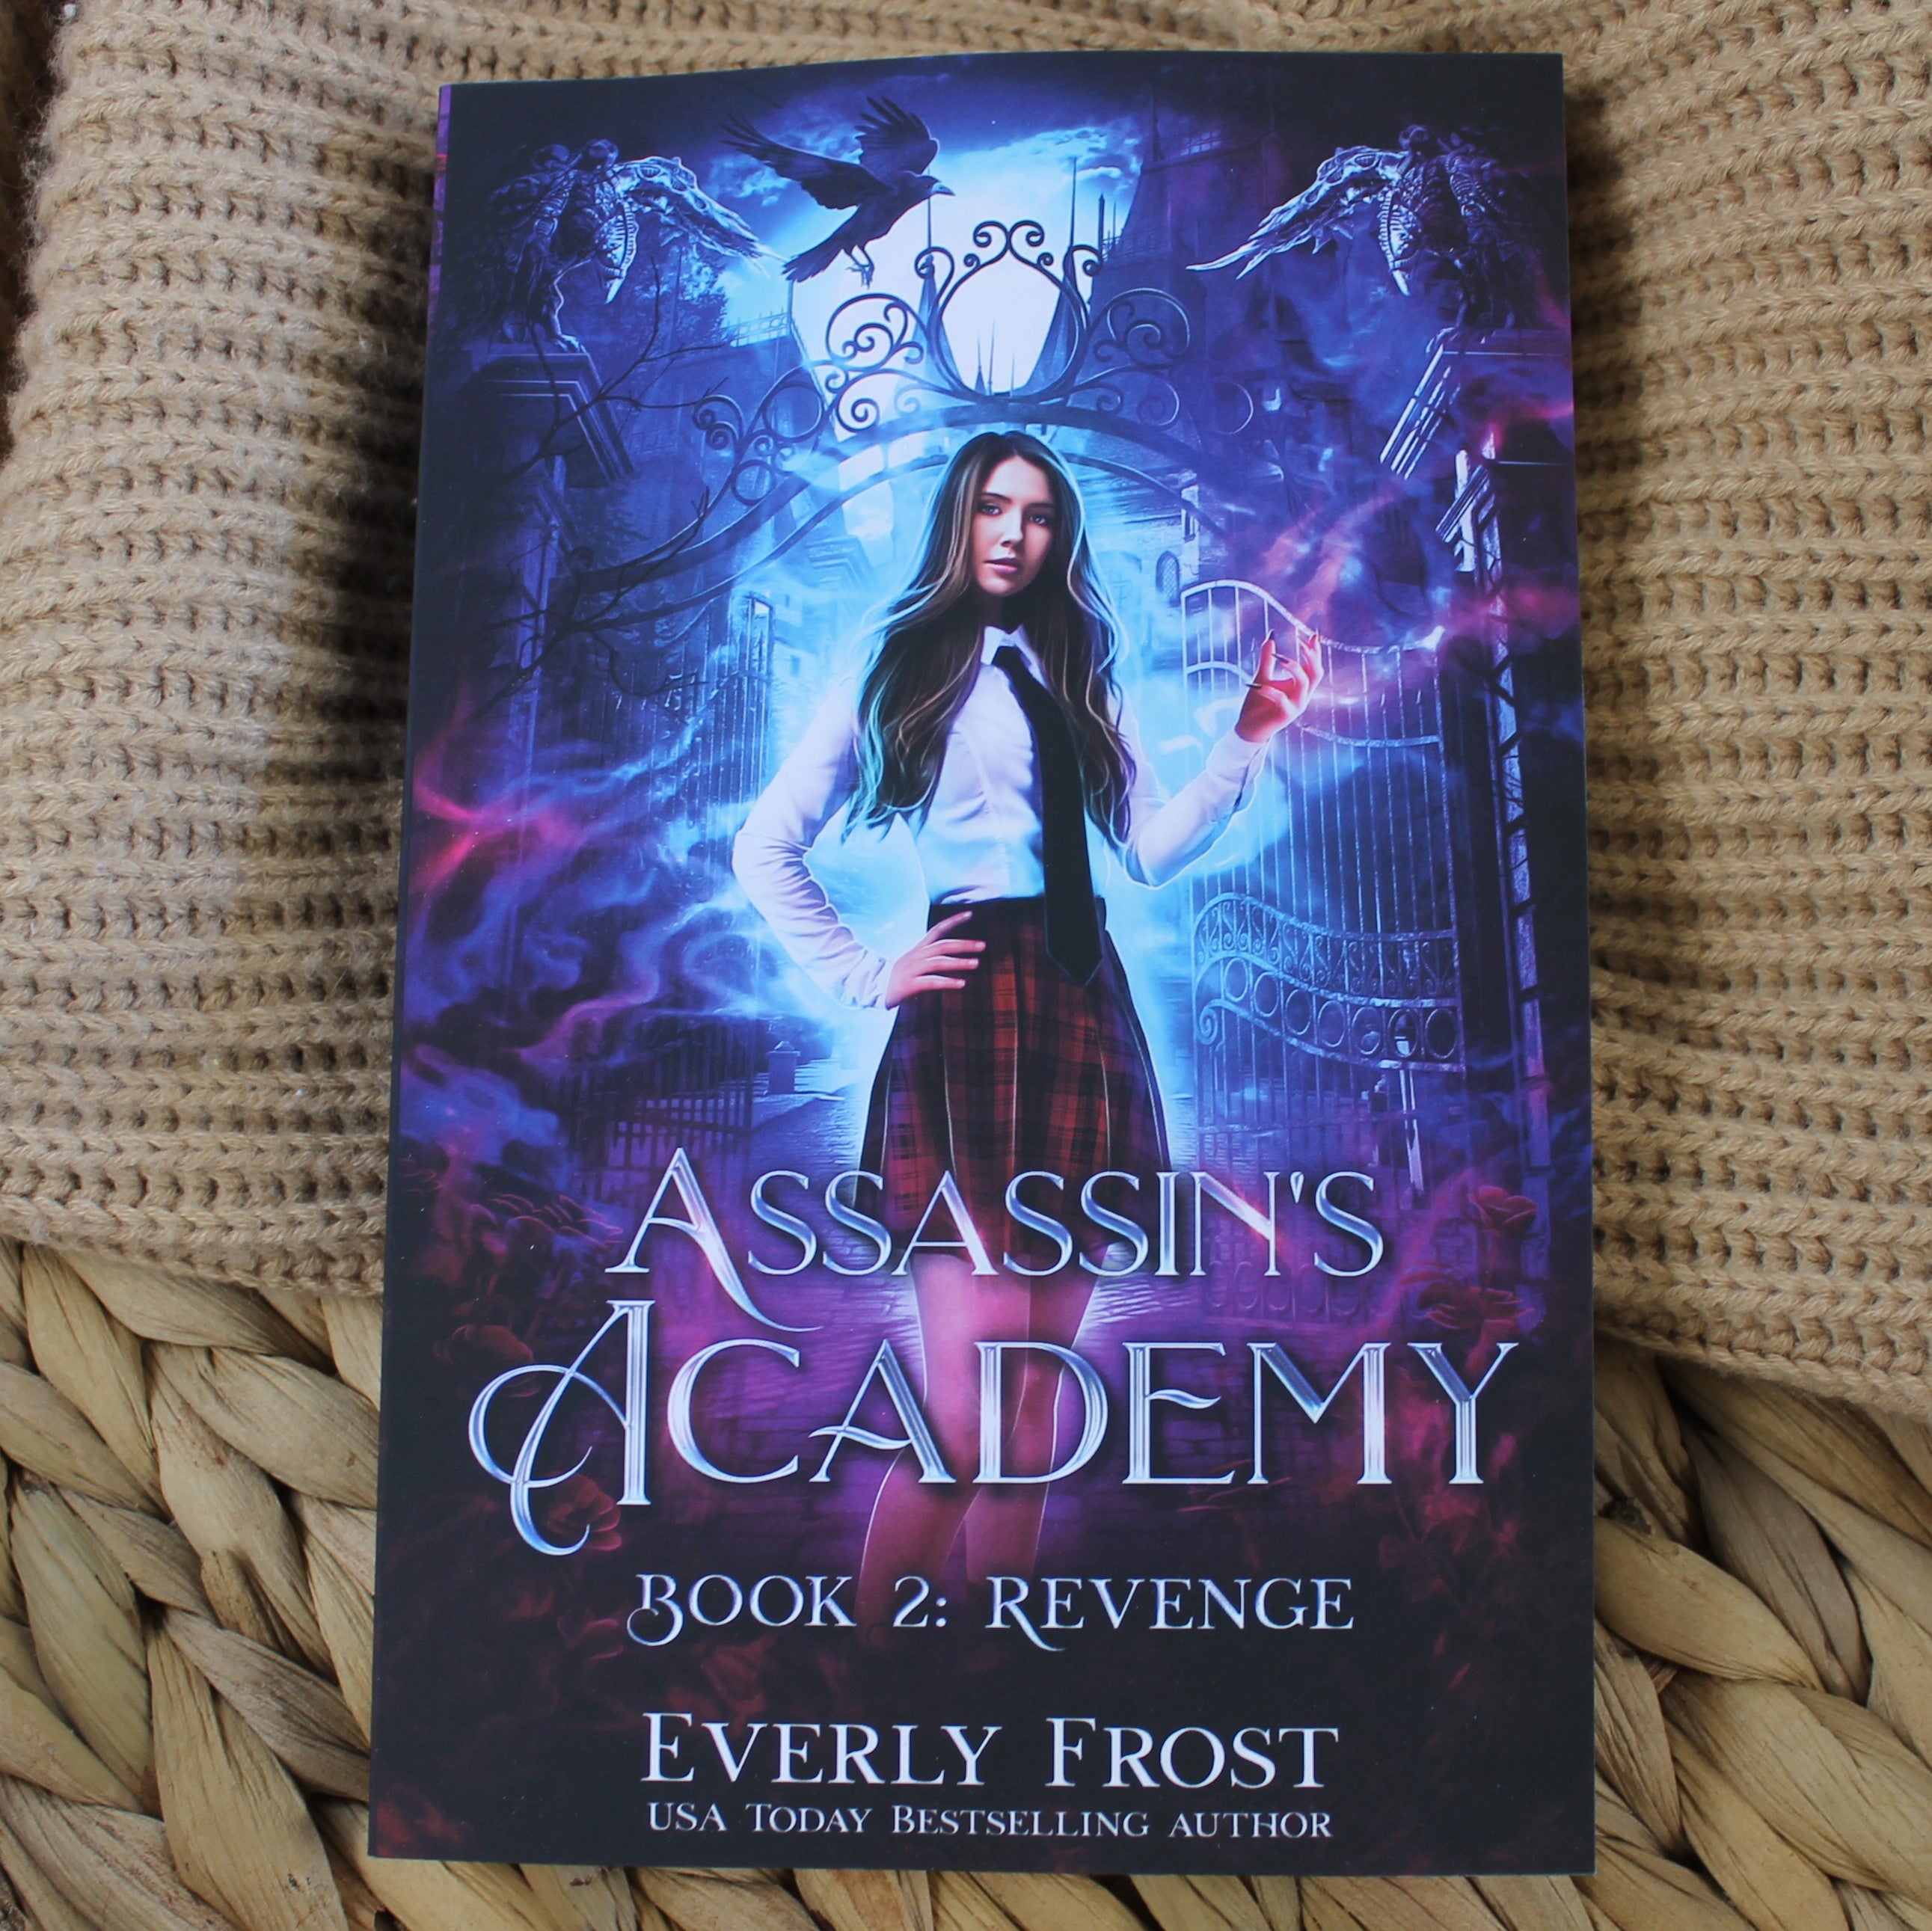 Assassin's Academy series by Everly Frost